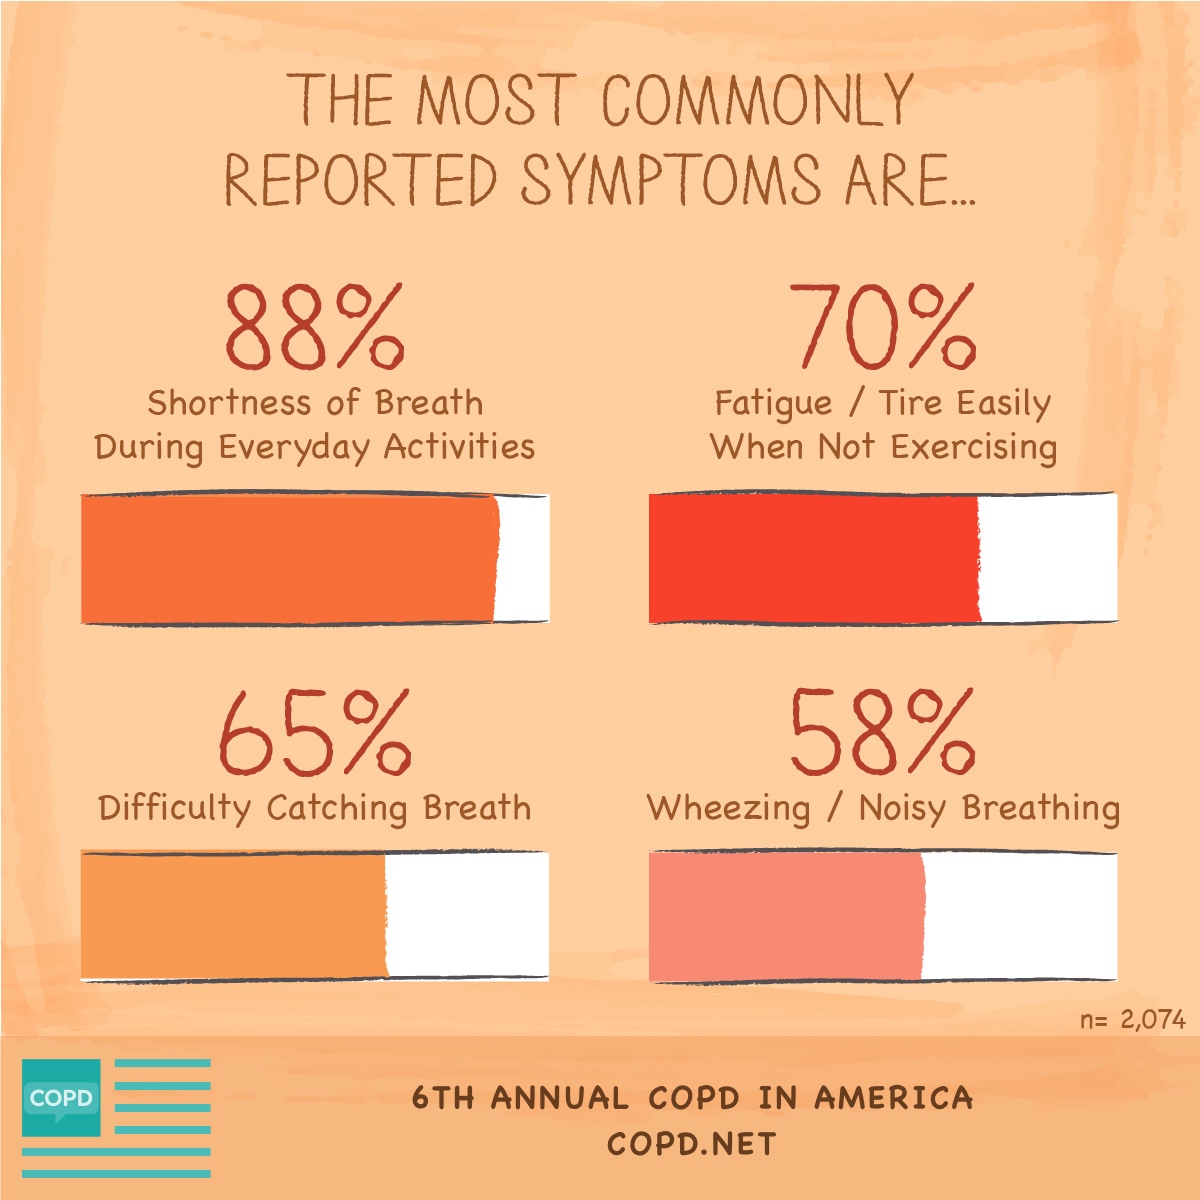 Four horizontal bar graphs (orange, red, light orange, pink) representing the most commonly reported COPD symptoms